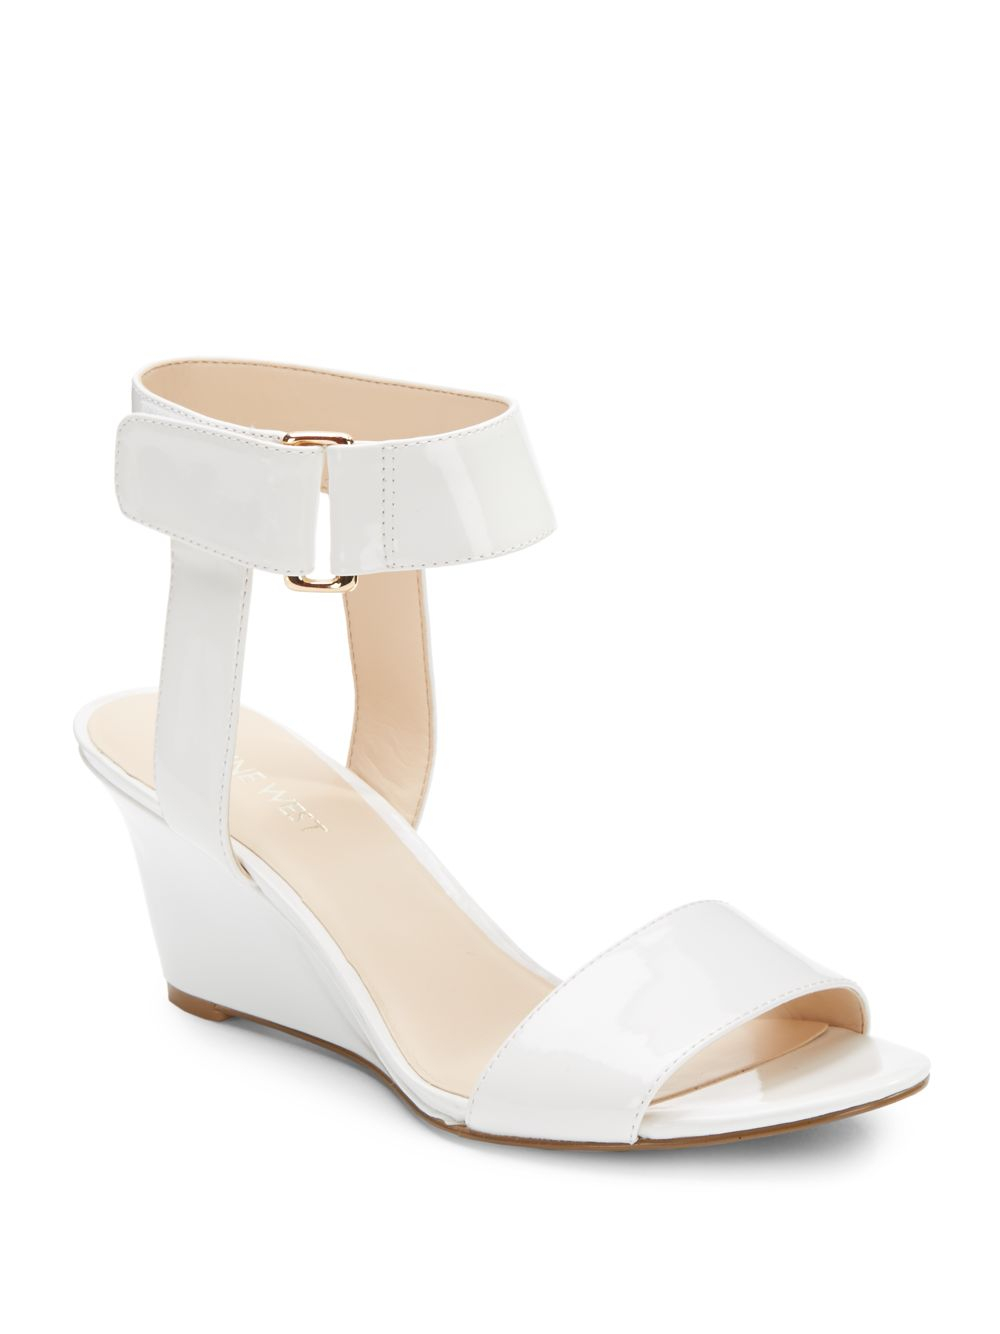 Lyst - Nine West Riley Ankle-Strap Wedge Sandals in White